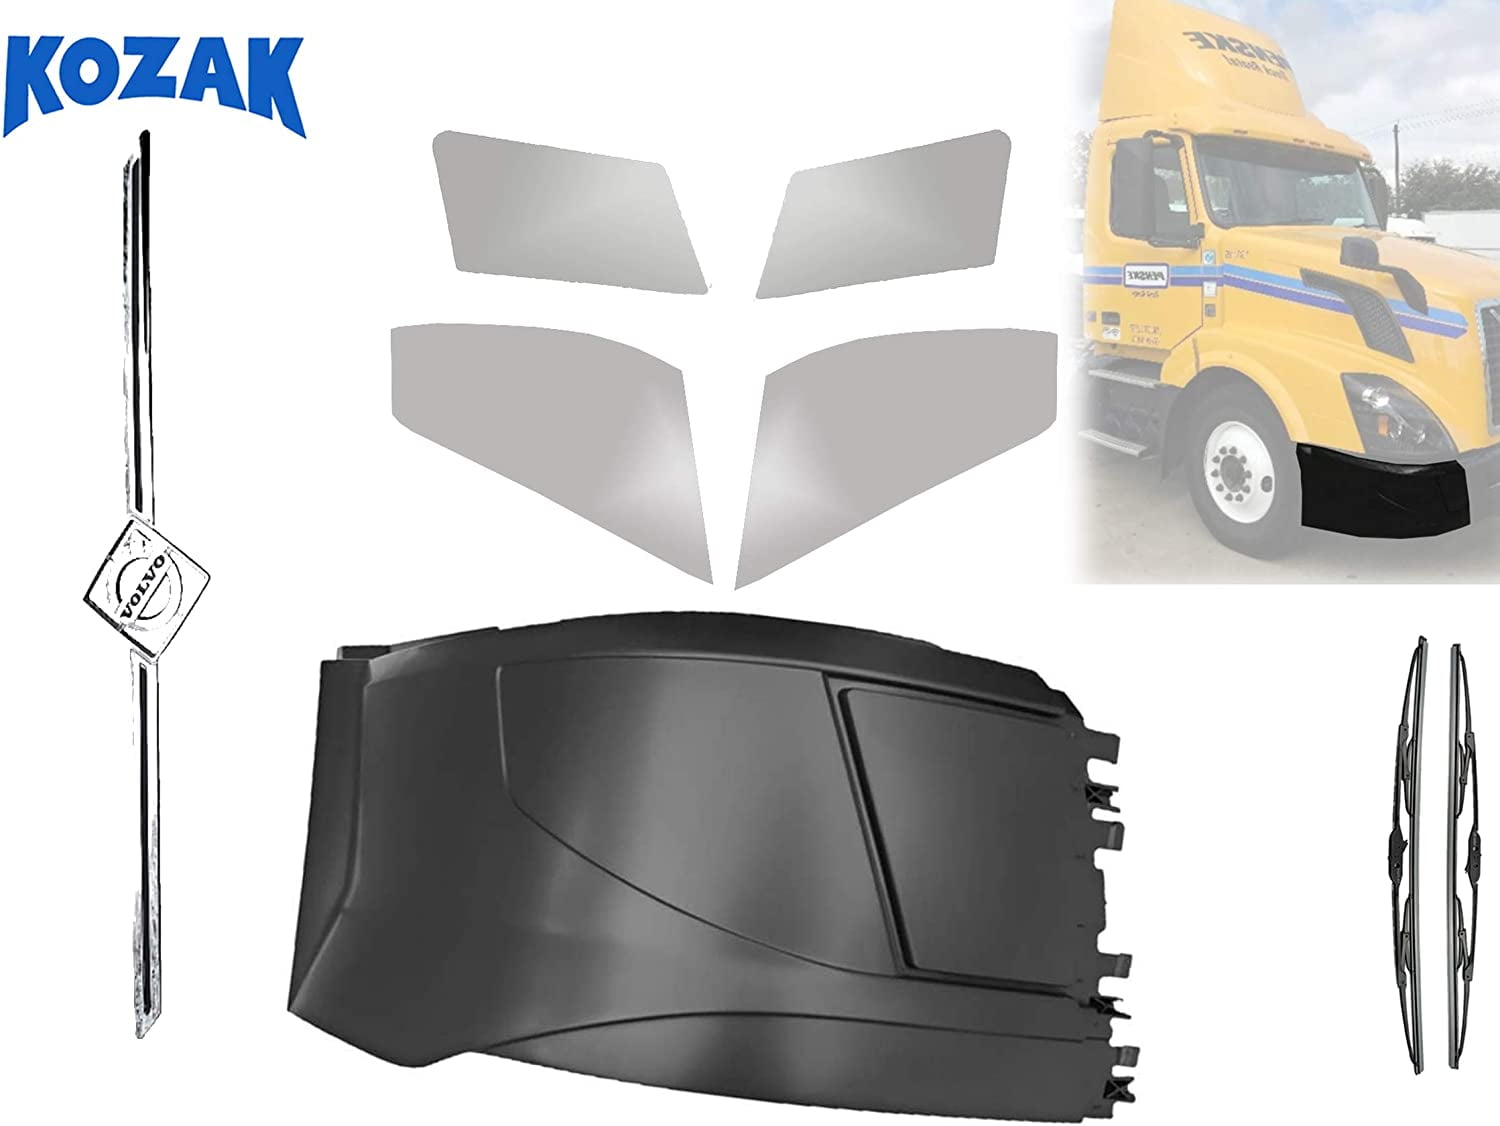 Center Bumper Cover Behind The Headlight Chrome Trim Set Air Intake Vent Set Plus Volvo Grille Stripe Without Logo and Wipers Chrome Trim Cover Set Kozak Volvo VNL 2004-2015 Chrome Trim Set 